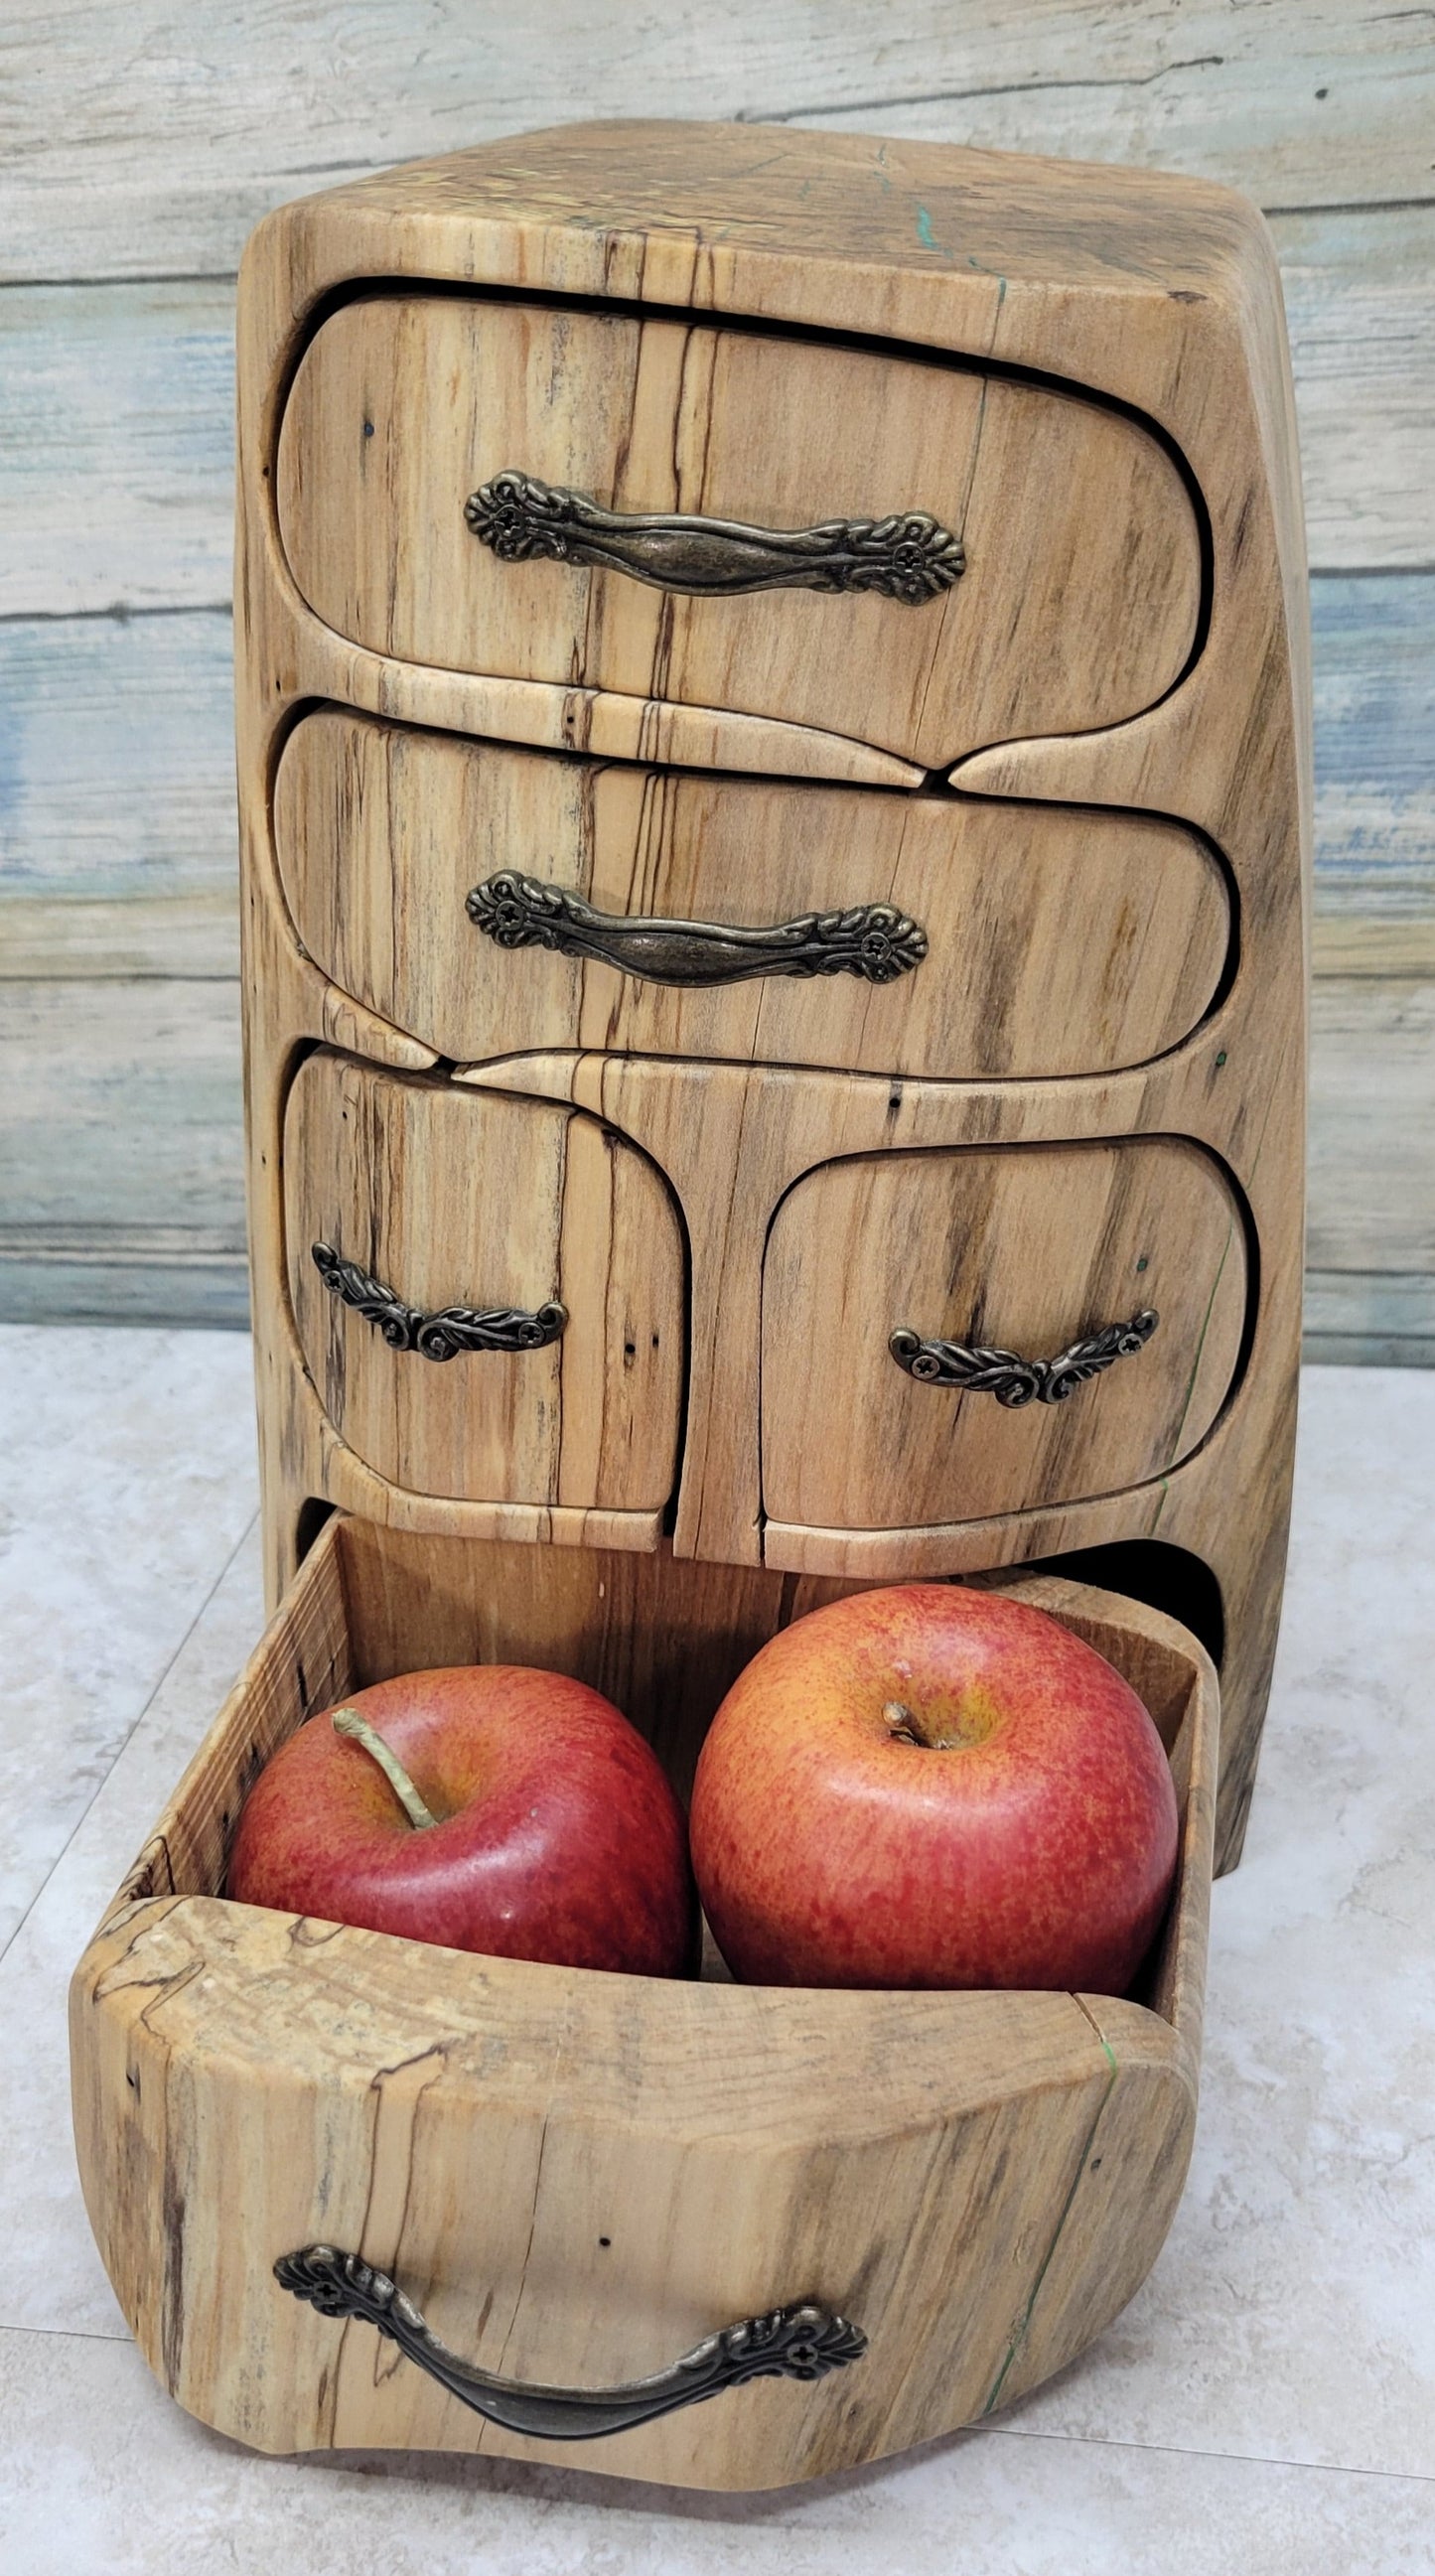 Spalted Maple Box